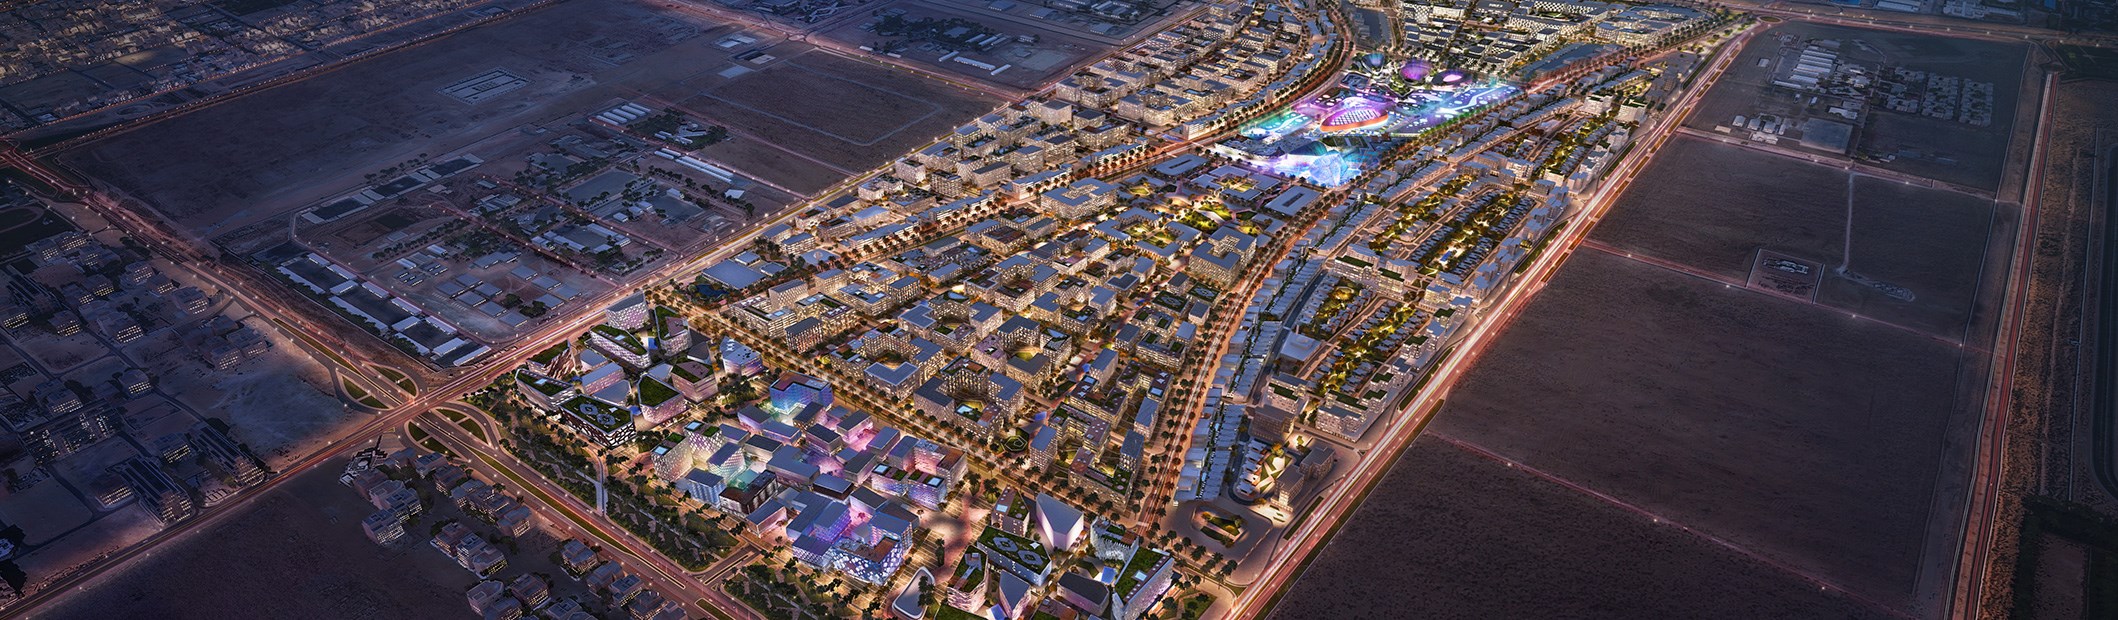 Arada launches Aljada, Sharjah’s largest ever real estate megaproject